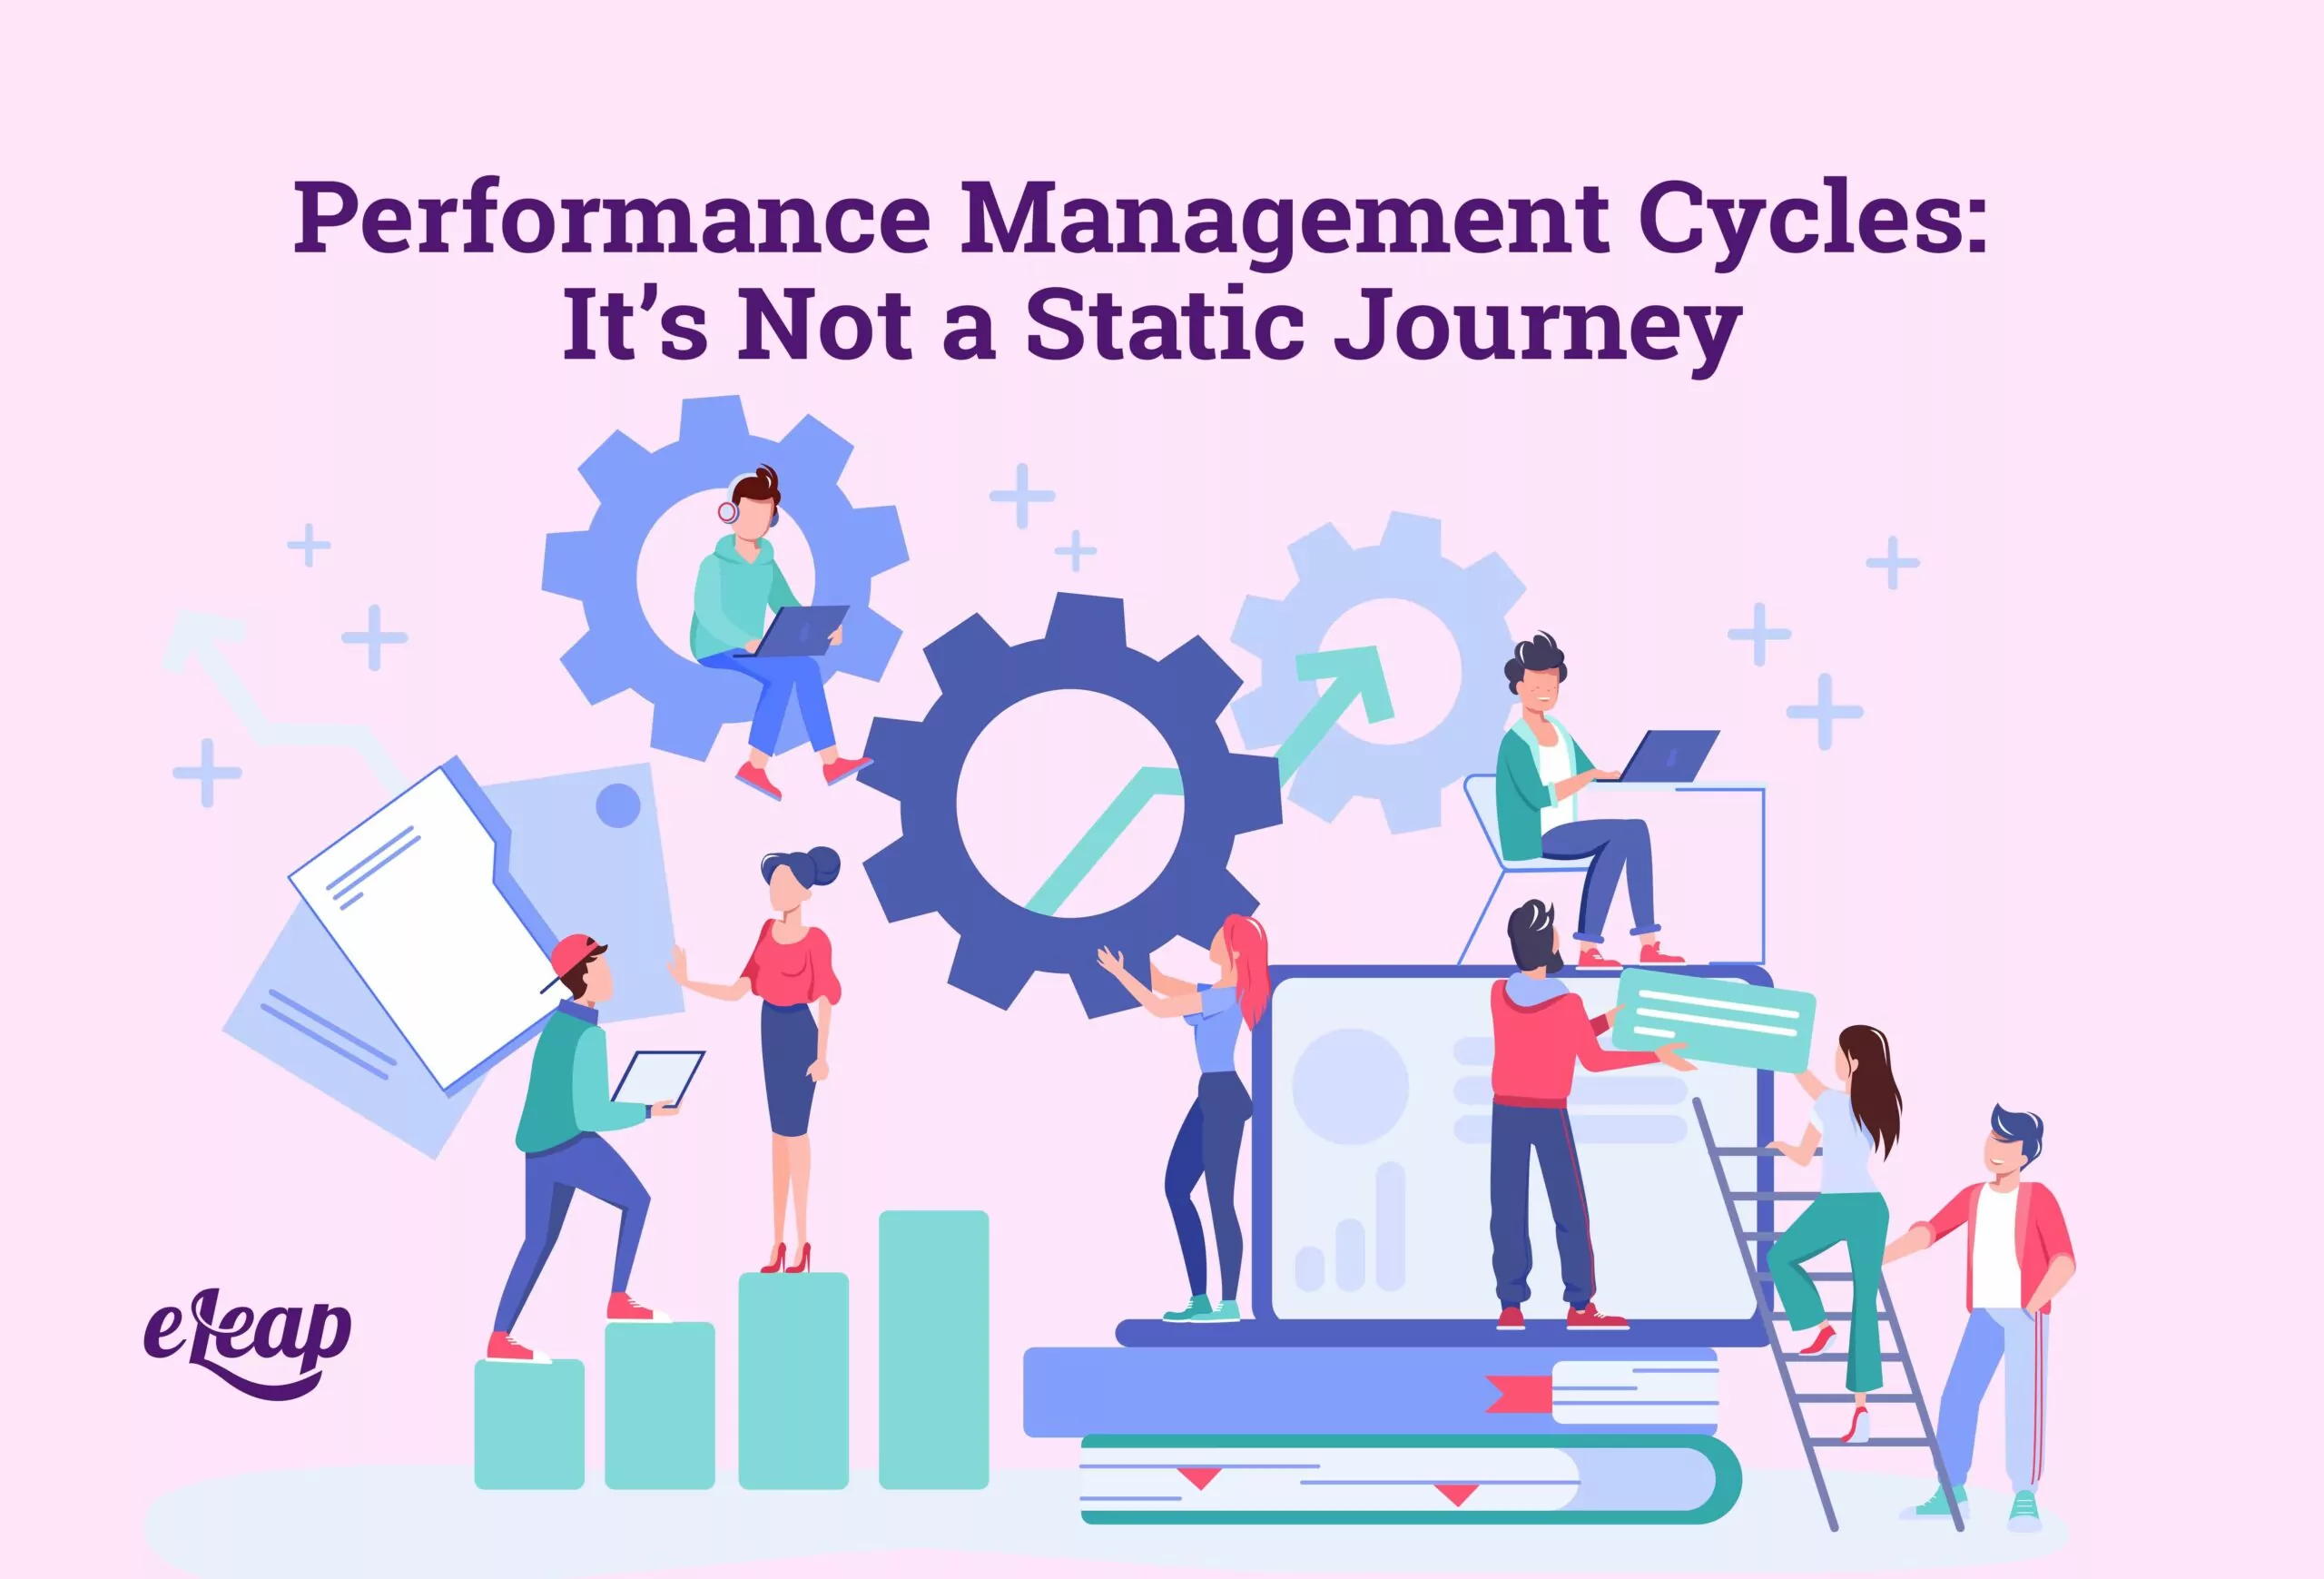 Performance Management Cycles: It’s Not a Static Journey